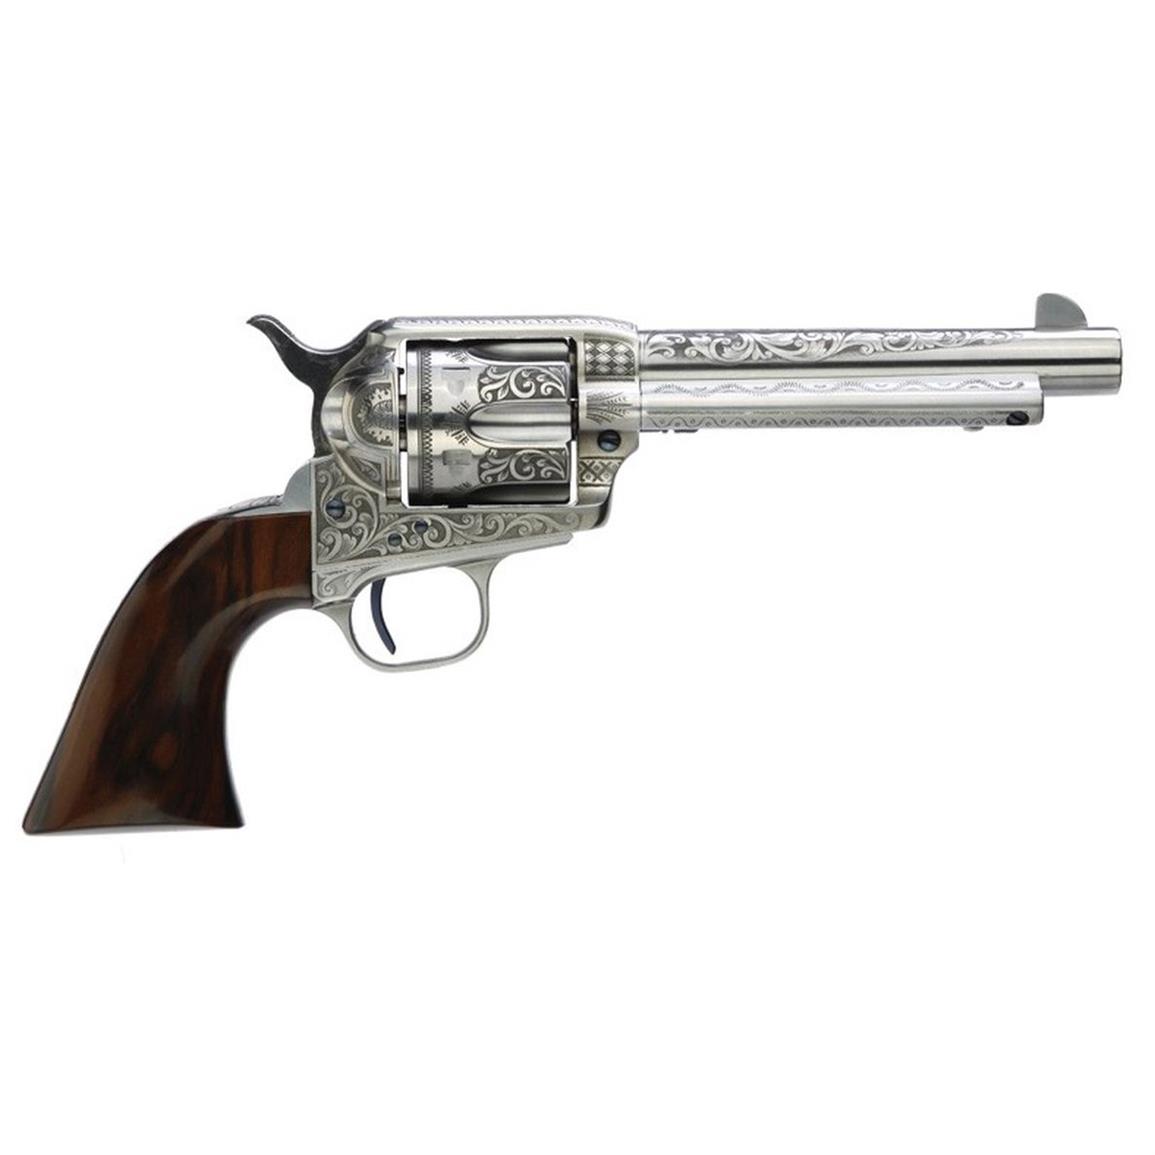 Taylor's & Co. Uberti 1873 Cattleman Photo Engraved, Revolver, .45 Colt, 4.75" Barrel, 6 Rounds